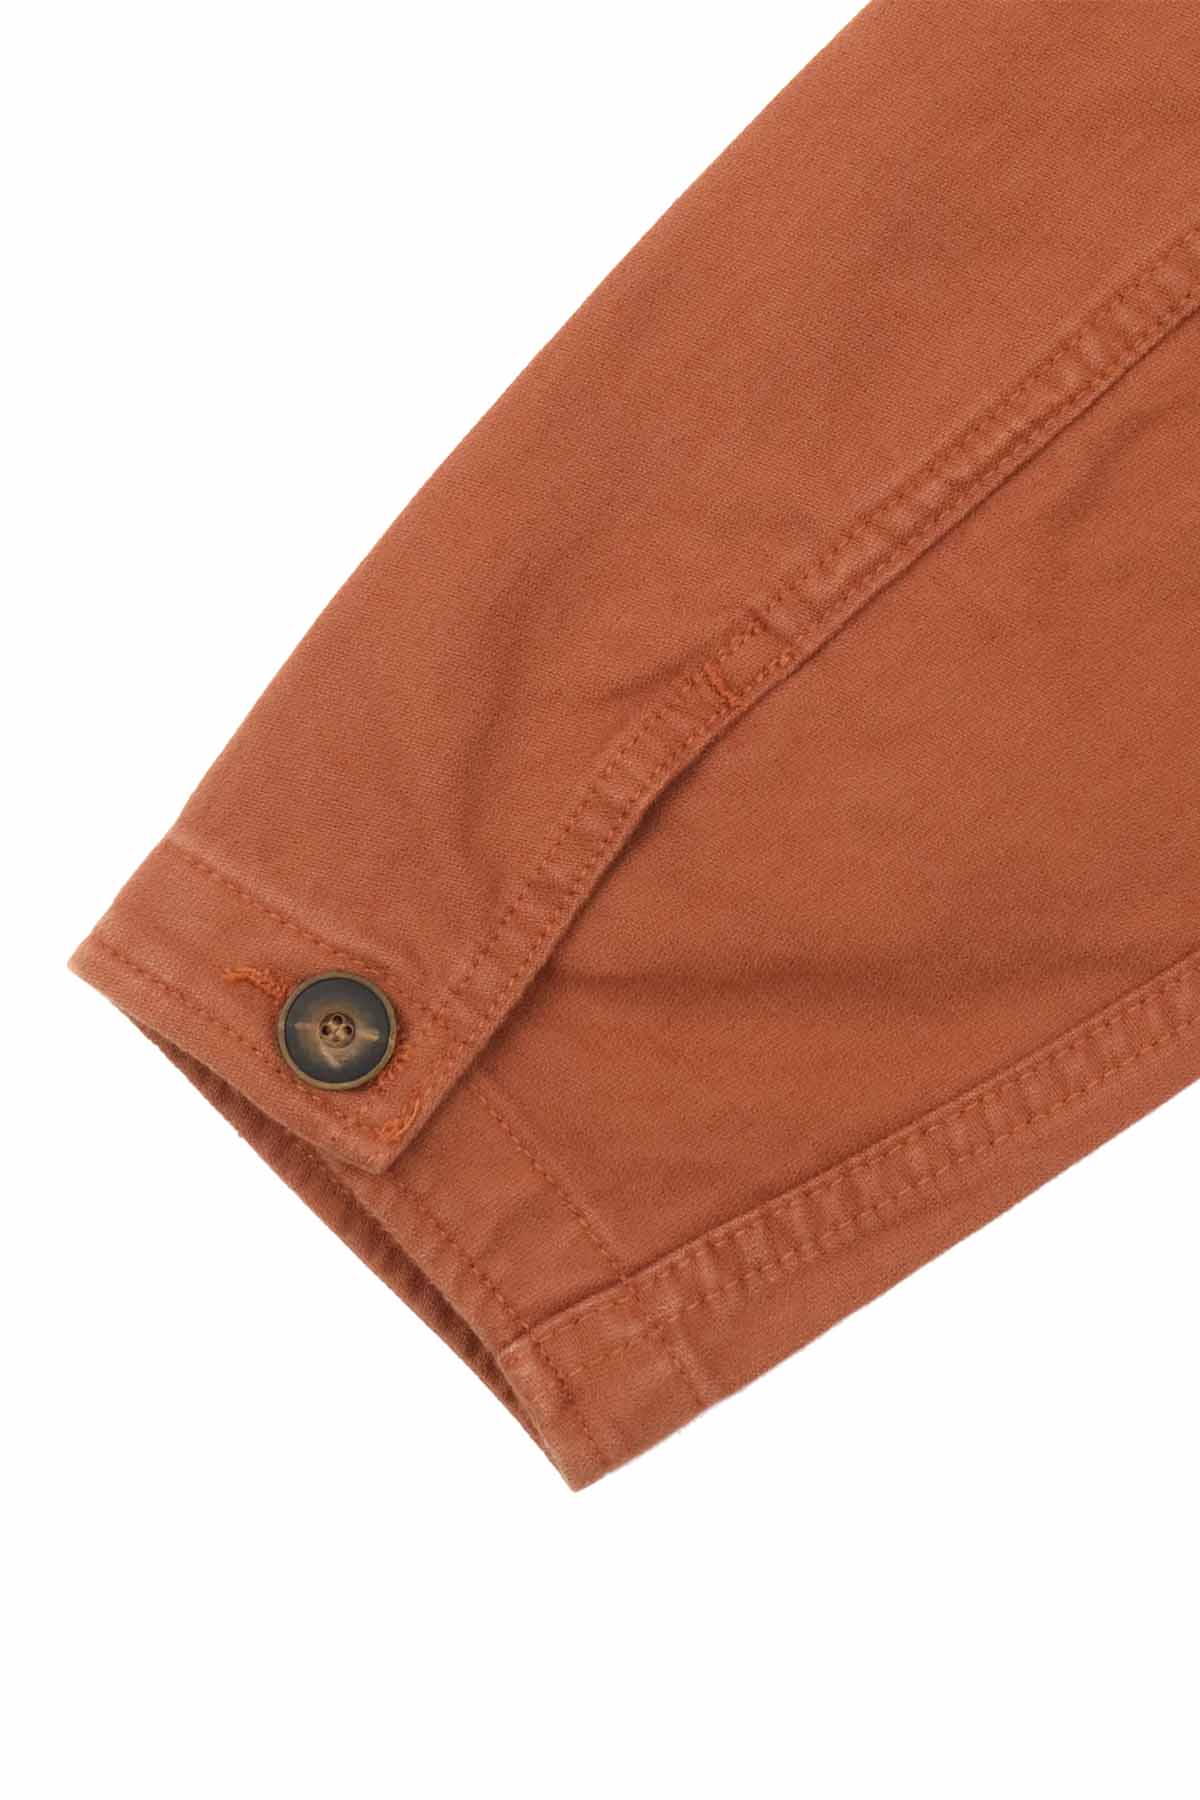 Freenote Cloth - Midway - Terracotta - Sleeve